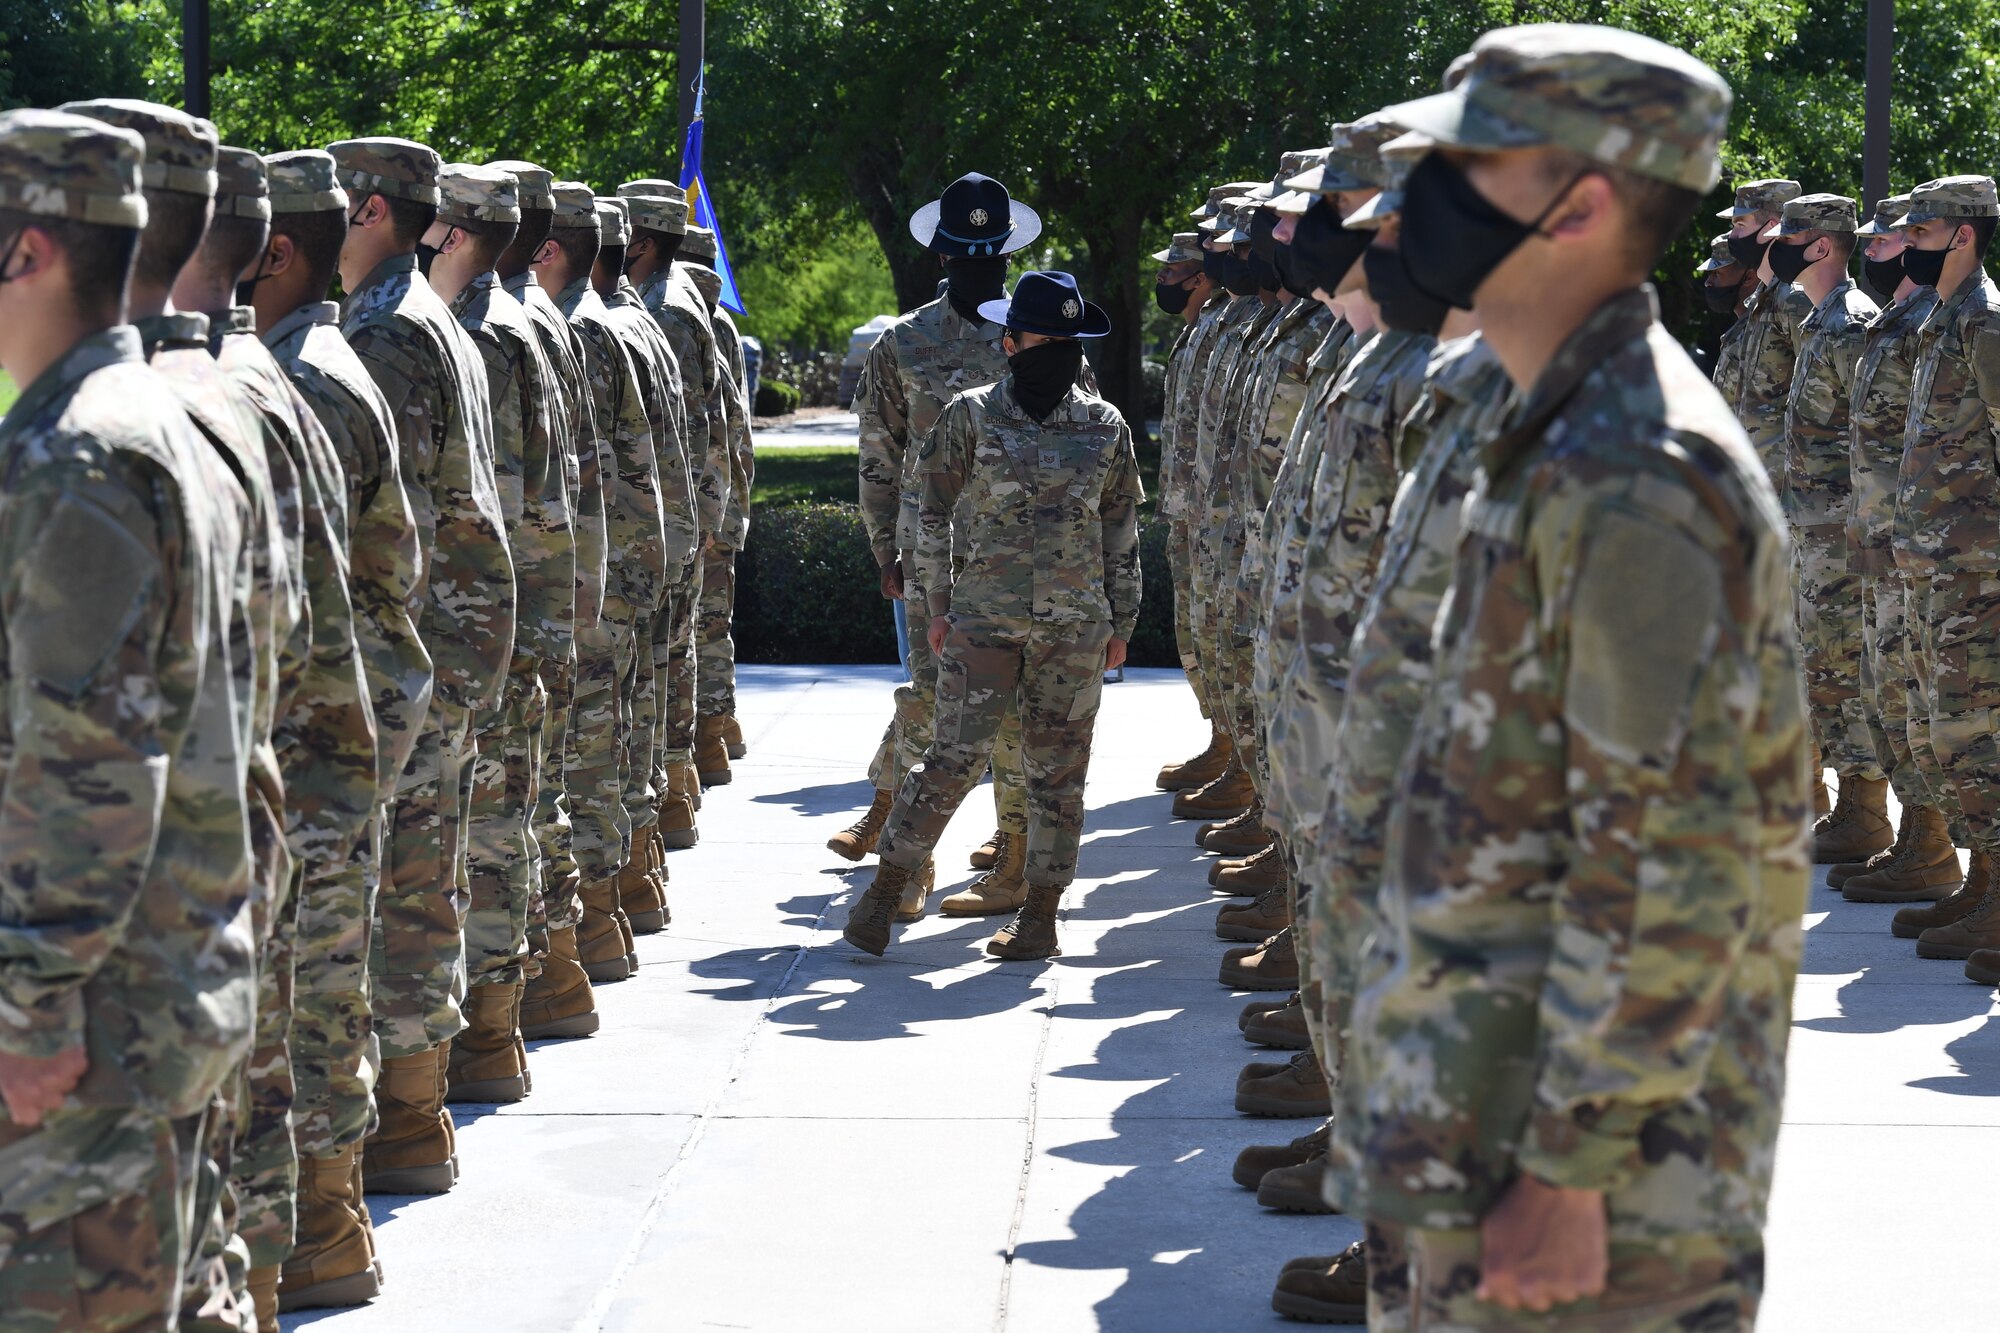 Military training instructor inspects ranks of Airmen